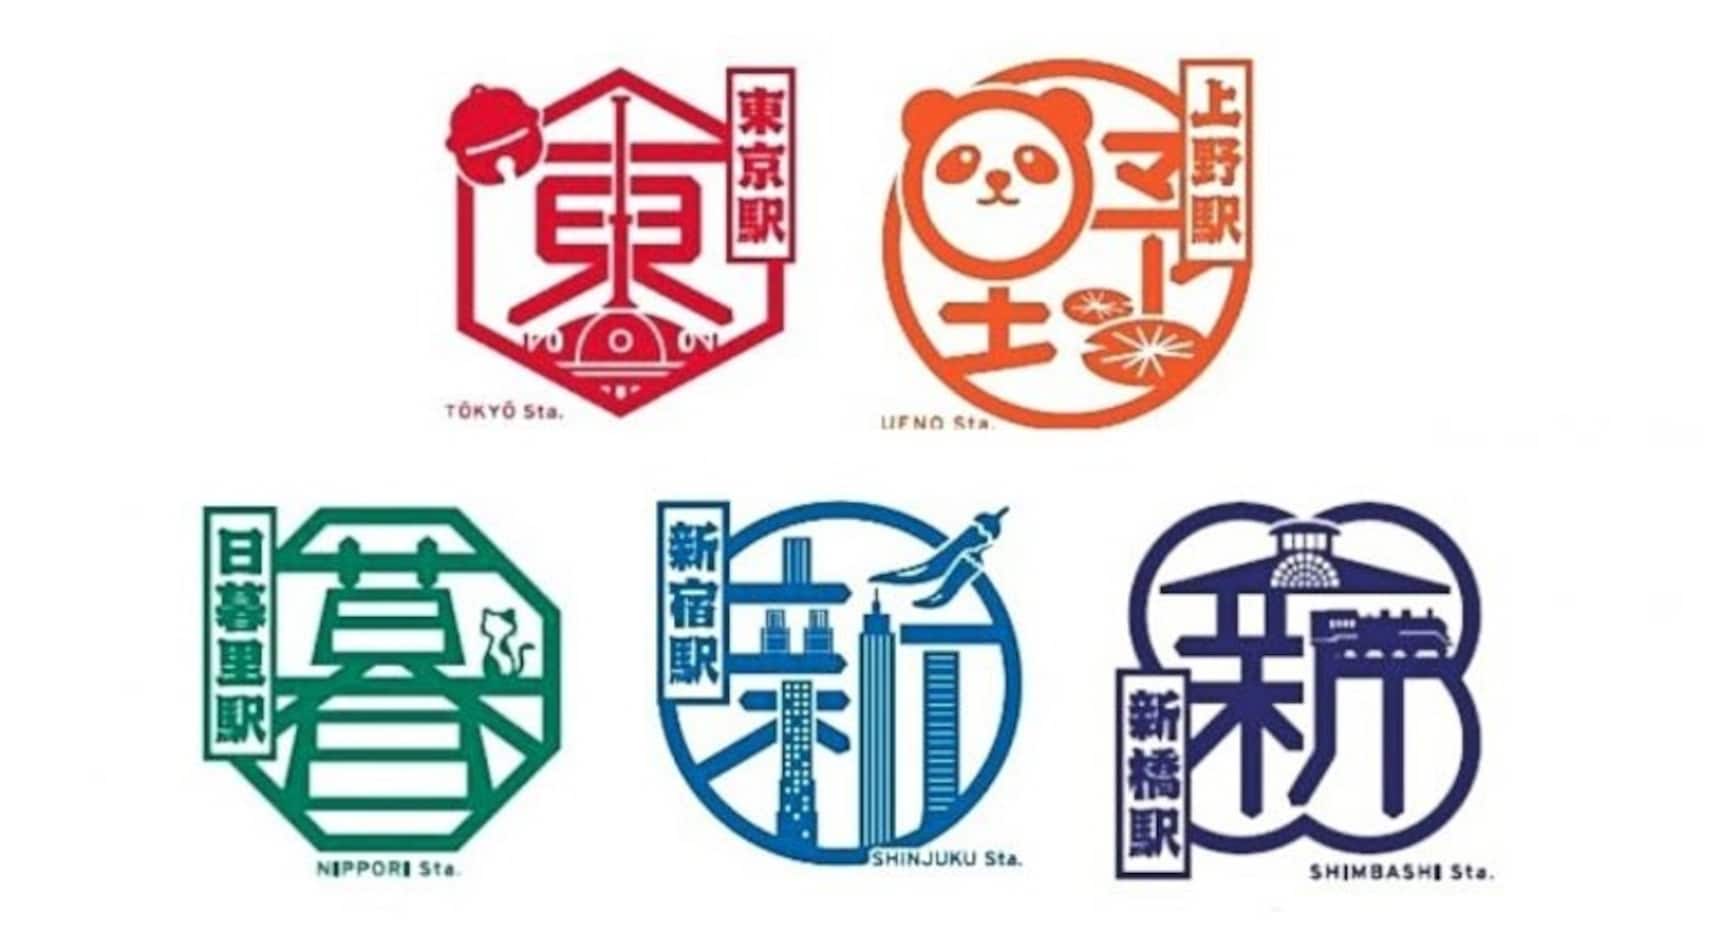 JR East Redesigns All Station Stamps in Tokyo